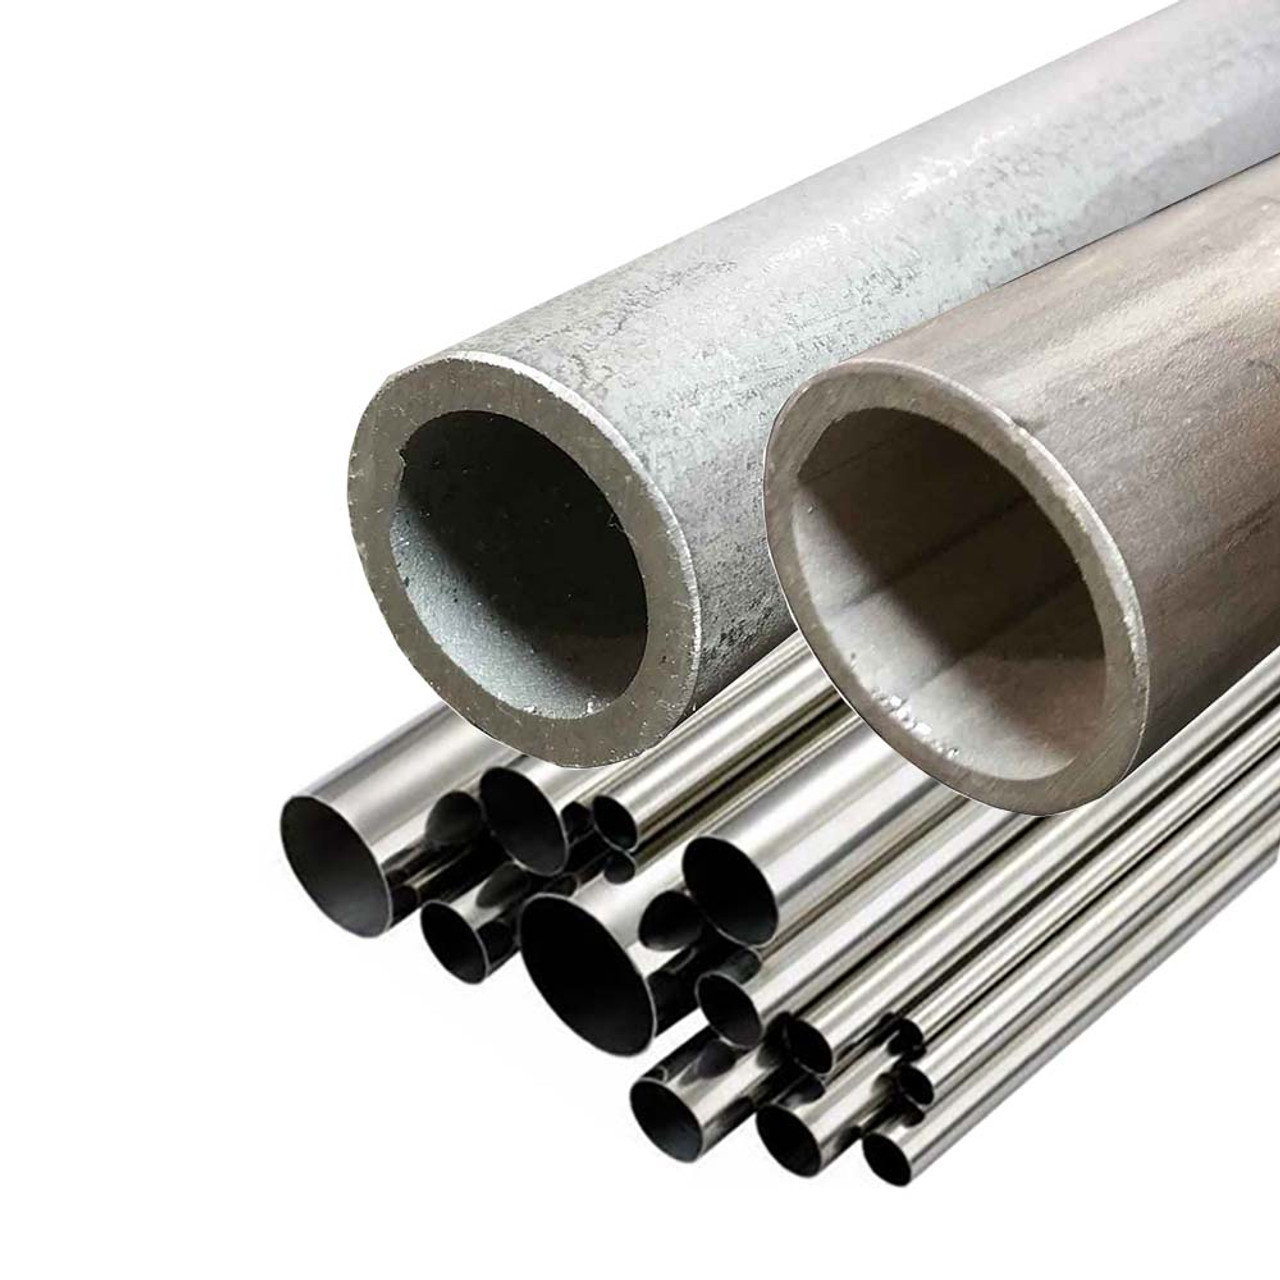 0.500" OD x 0.028" Wall x 36 inches, 304 Stainless Steel Round Tube, Welded